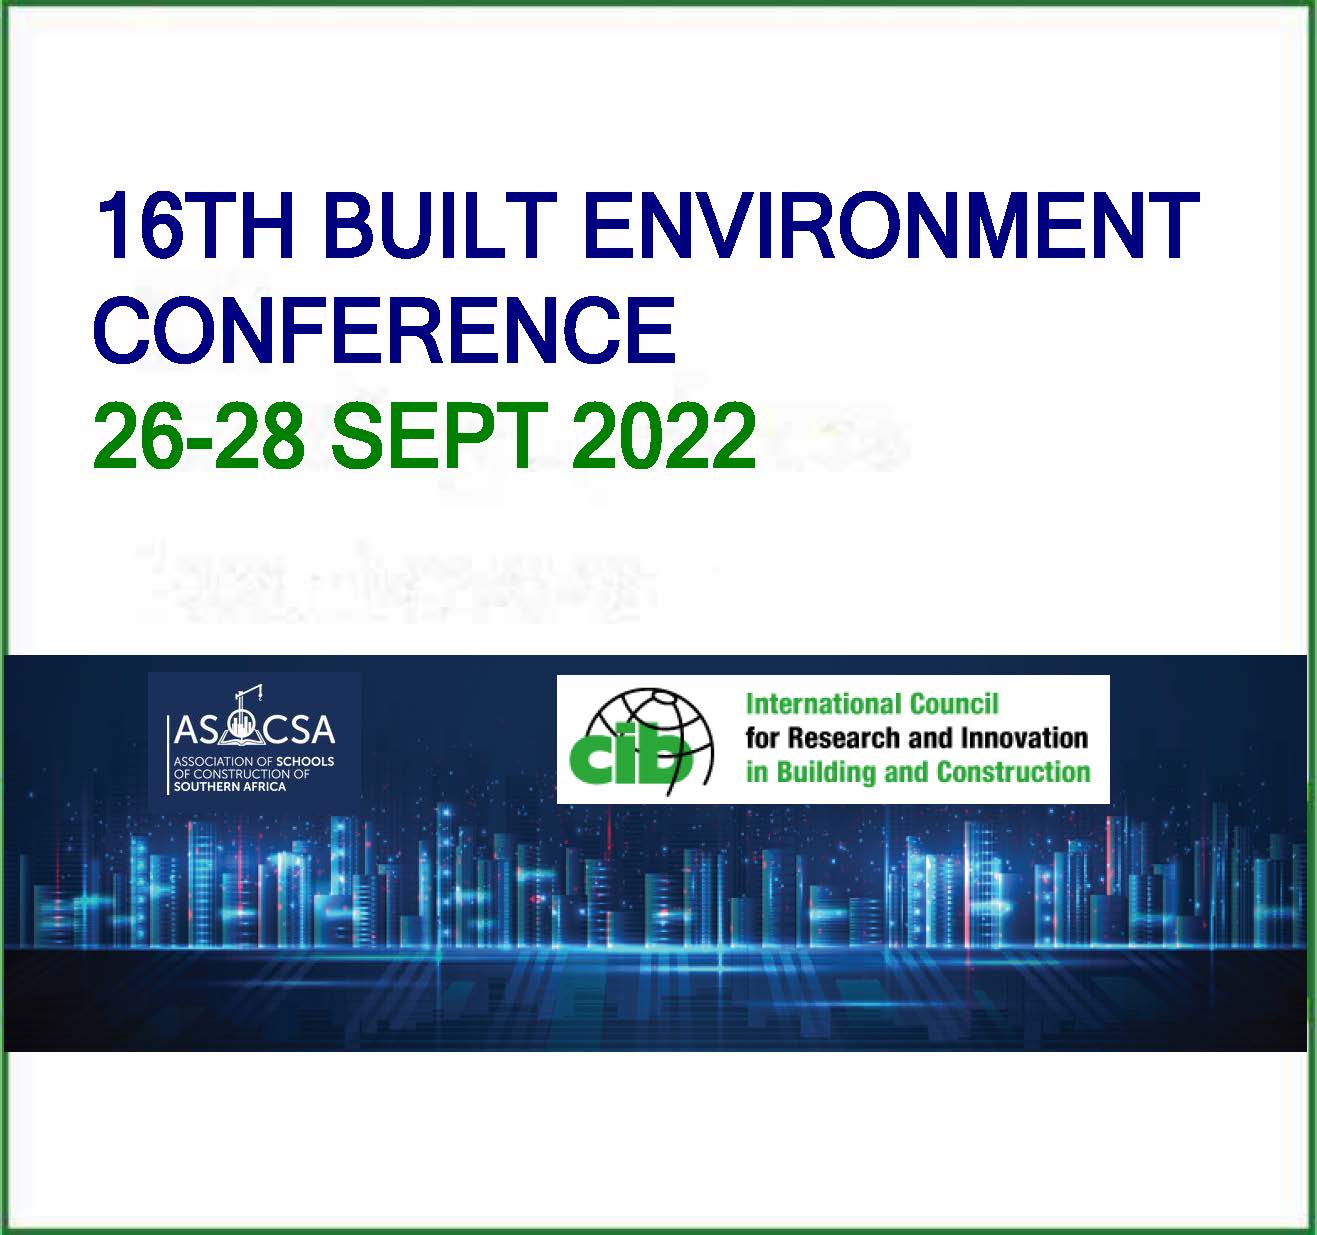 CFP: 16th Built Environment Conference, Durban, South Africa, September 26-28, 2022